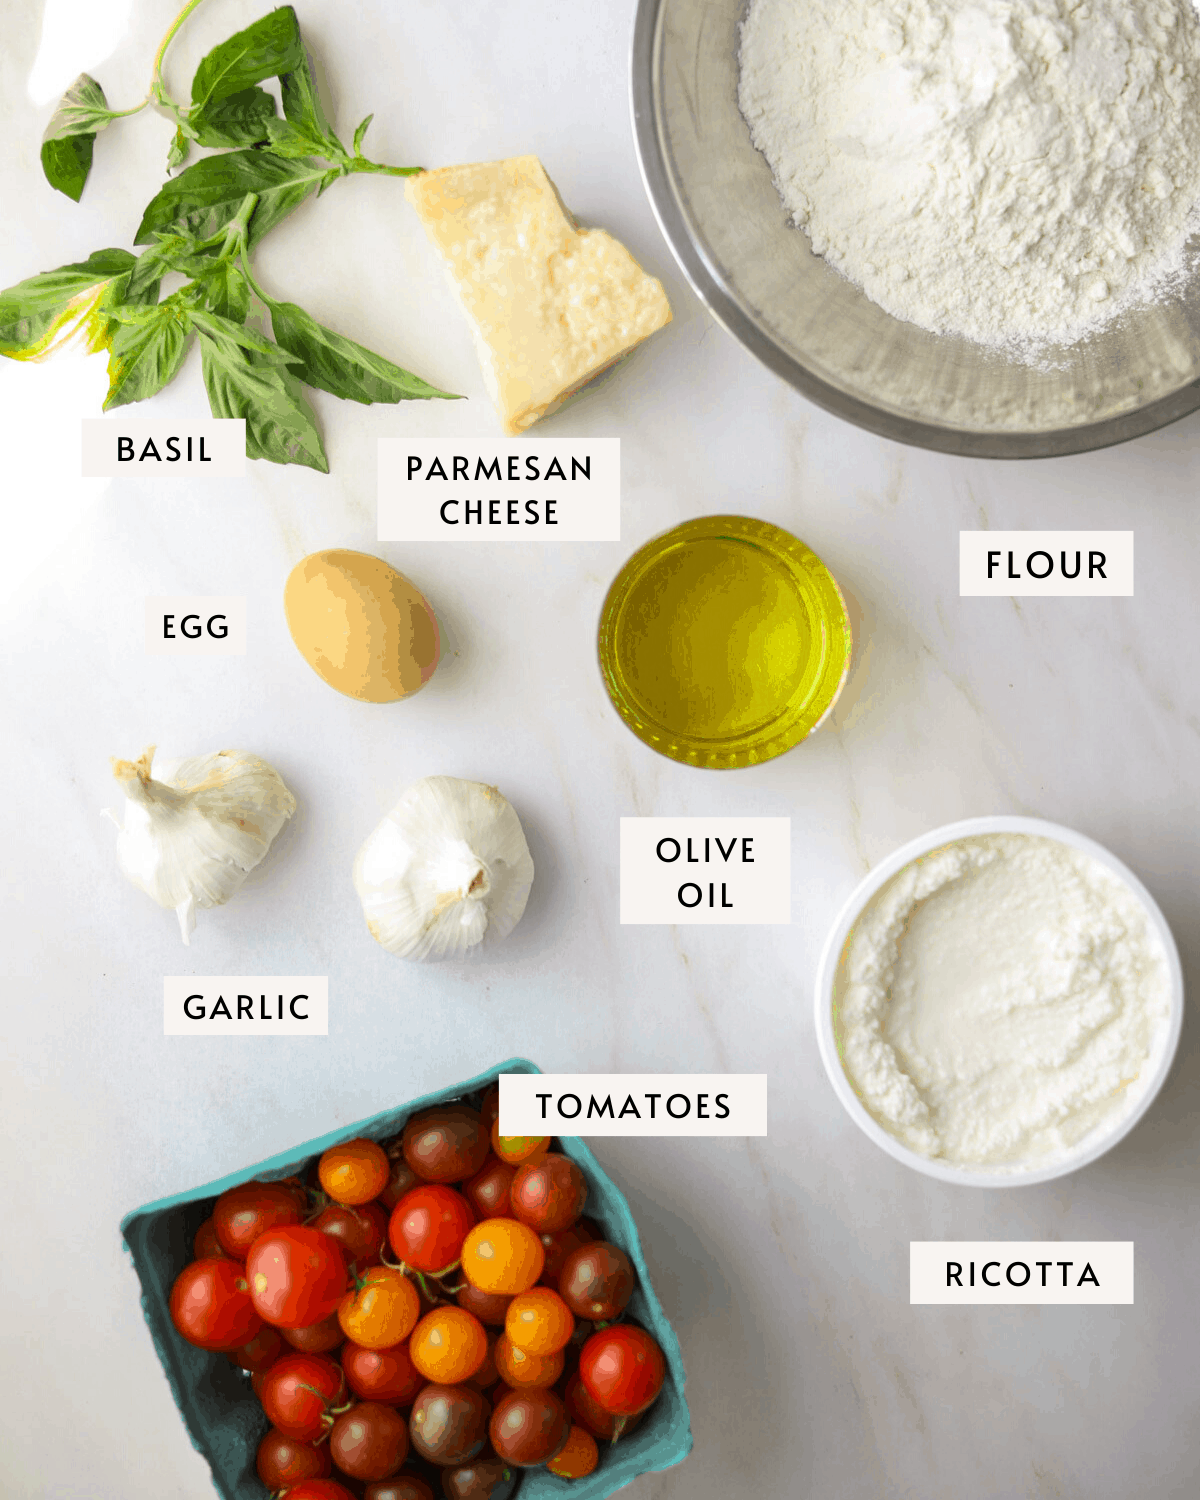 recipe ingredients individually portioned: flour, olive oil, tomatoes, ricotta, garlic and basil